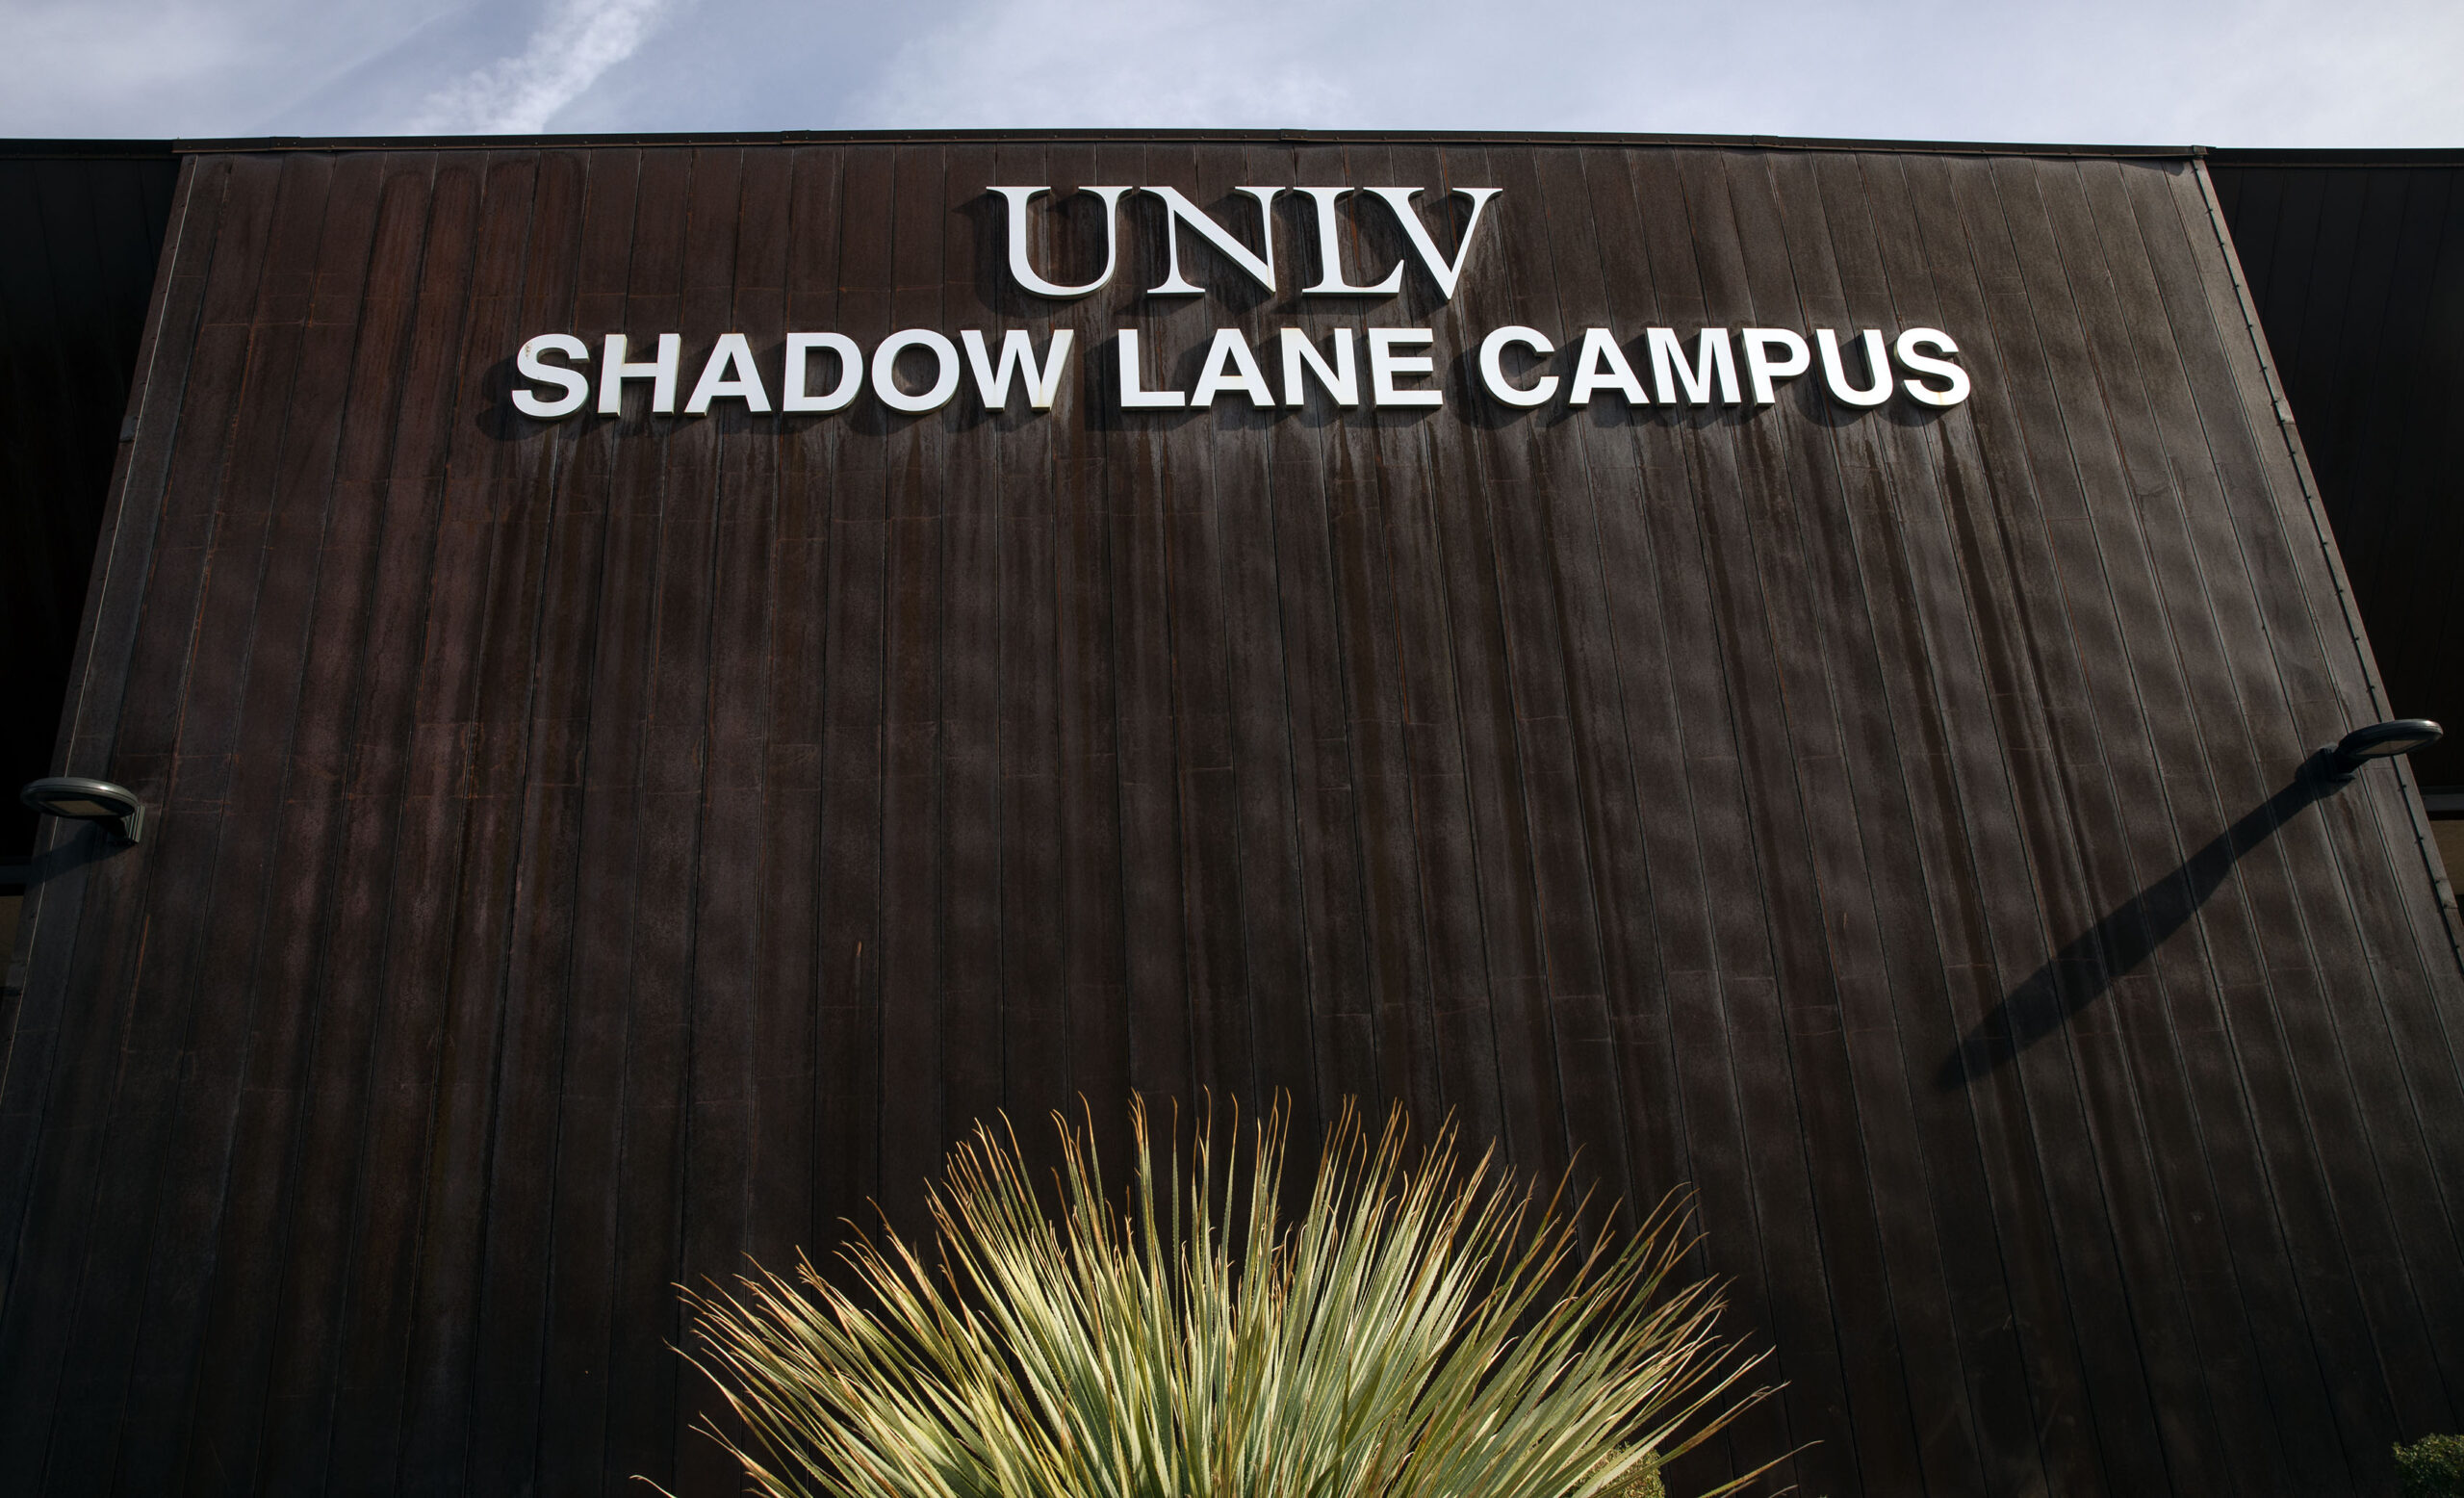 The sign at the UNLV Shadow Lane Campus